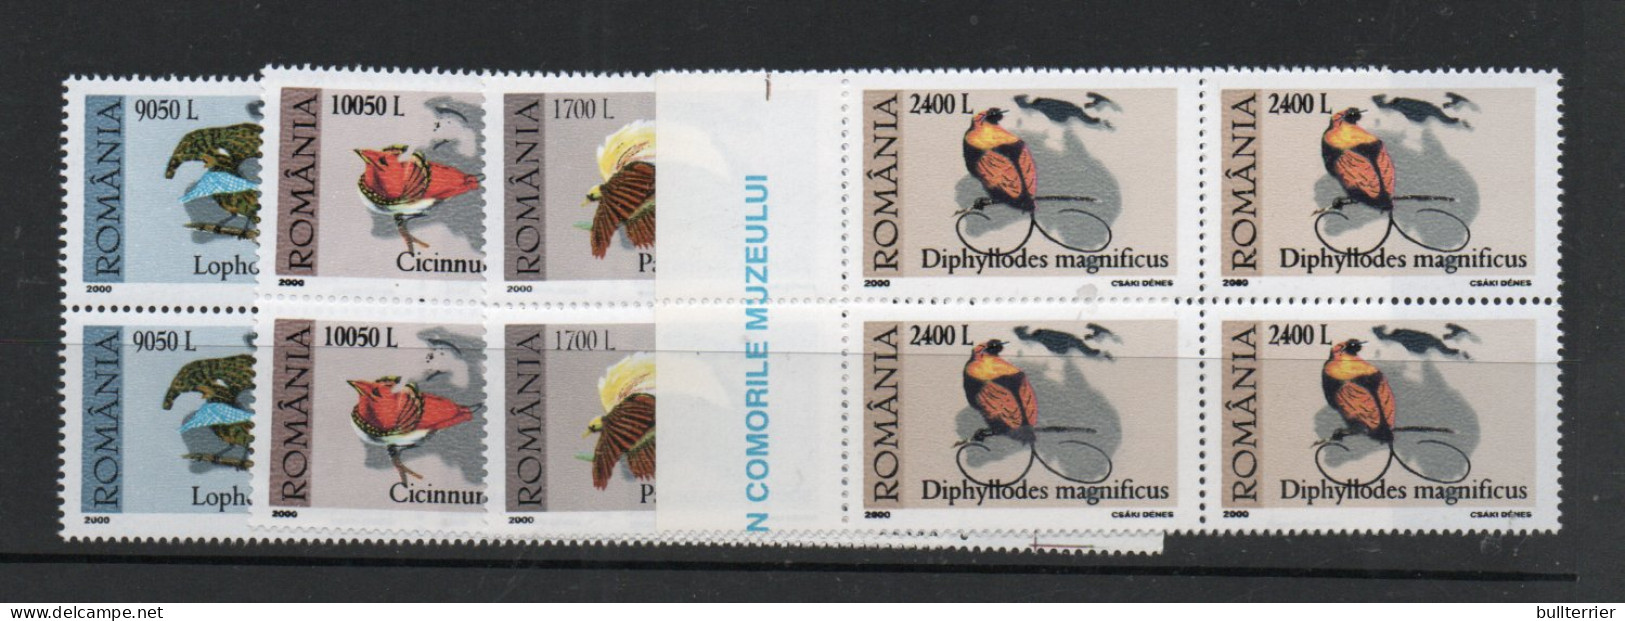 BIRDS  -  ROMANIA - 2000 - BIRDS OF PARADISE  SET OF 4 IN BLOCKS OF 4  MINT NEVER HINGED, SG CAT £23.60 - Piccioni & Colombe